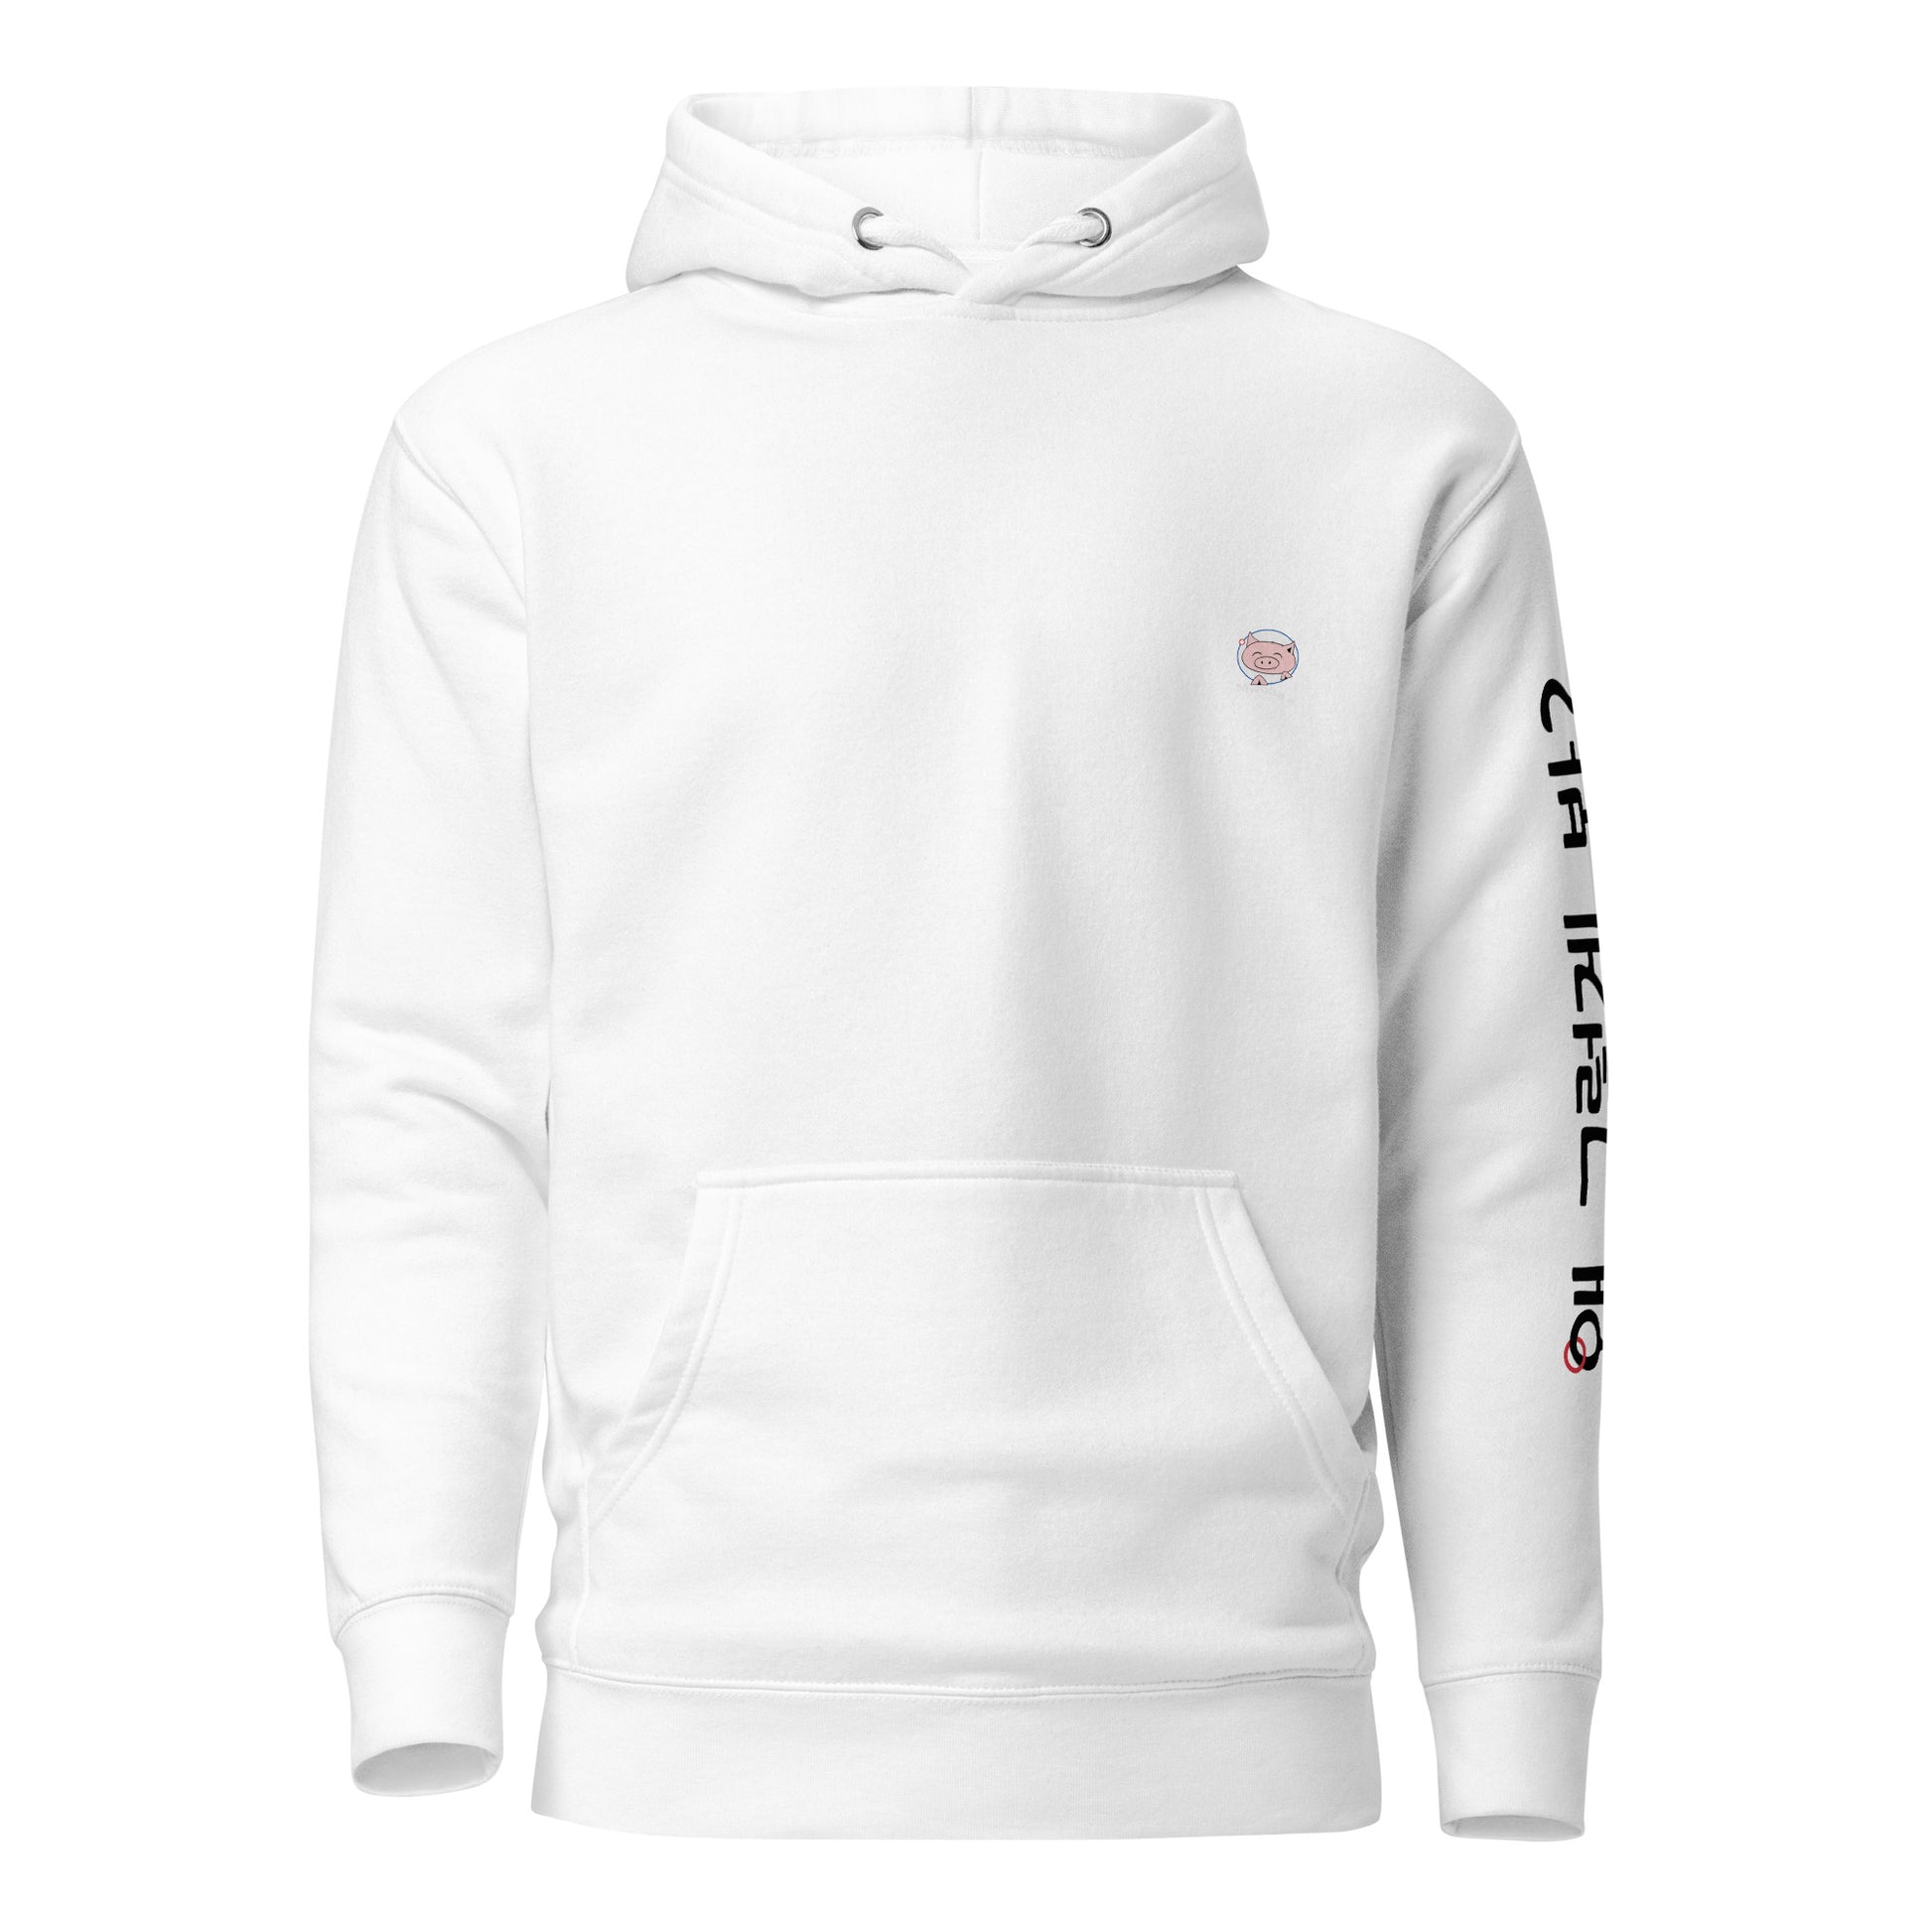 White hoodie with small Mwohae logo on the left chest